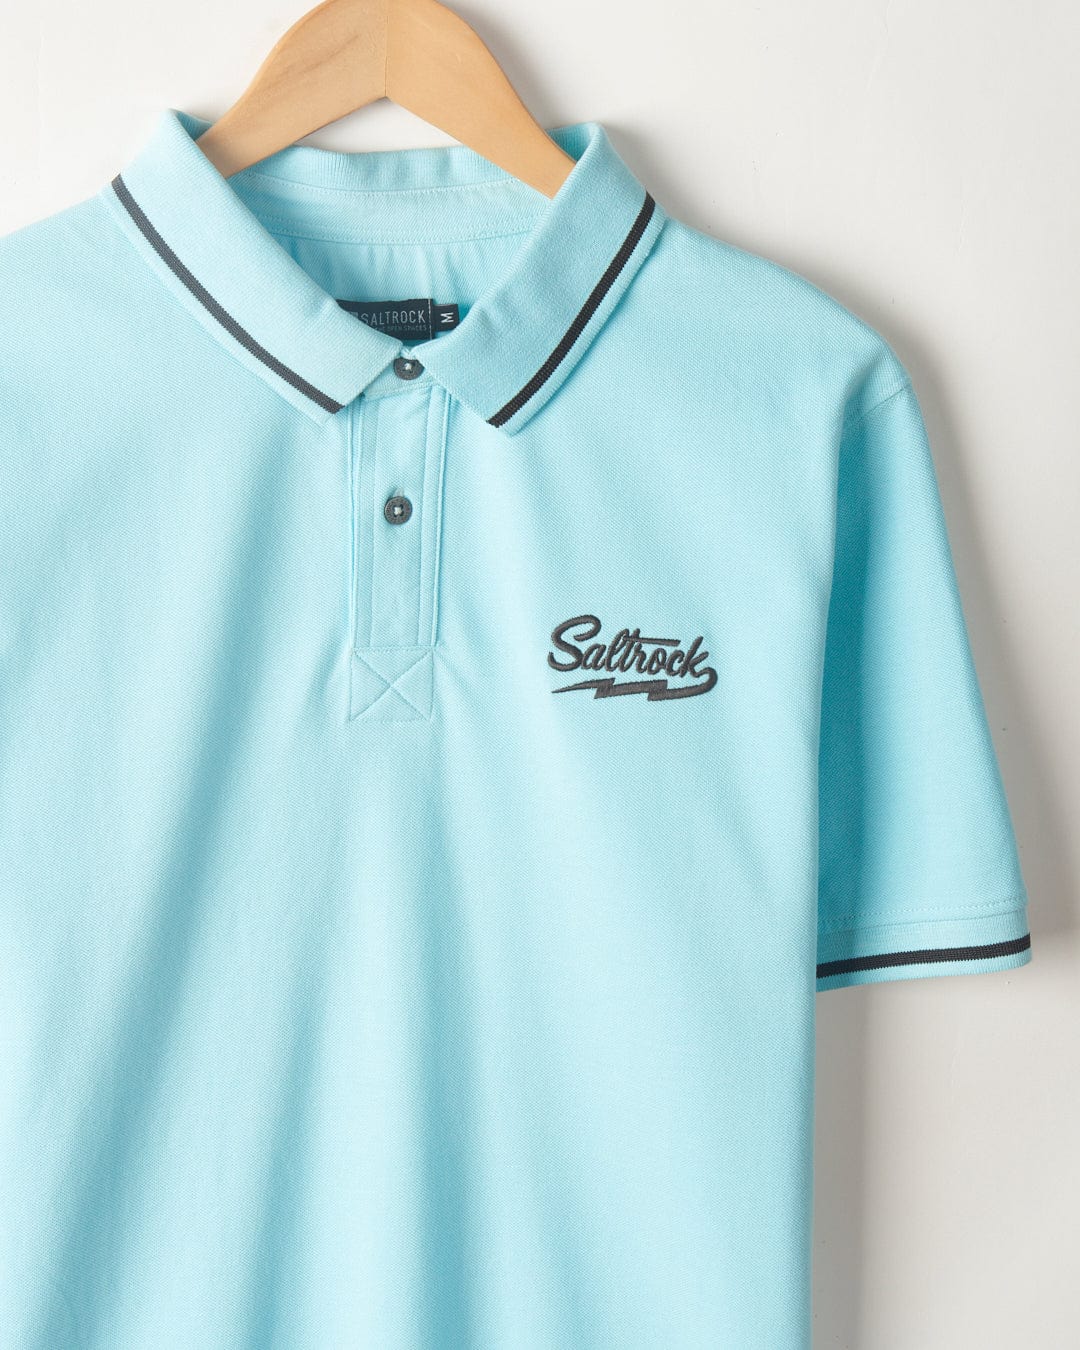 Strike Logo polo shirt with Saltrock logo on the chest, hanging on a white wall.